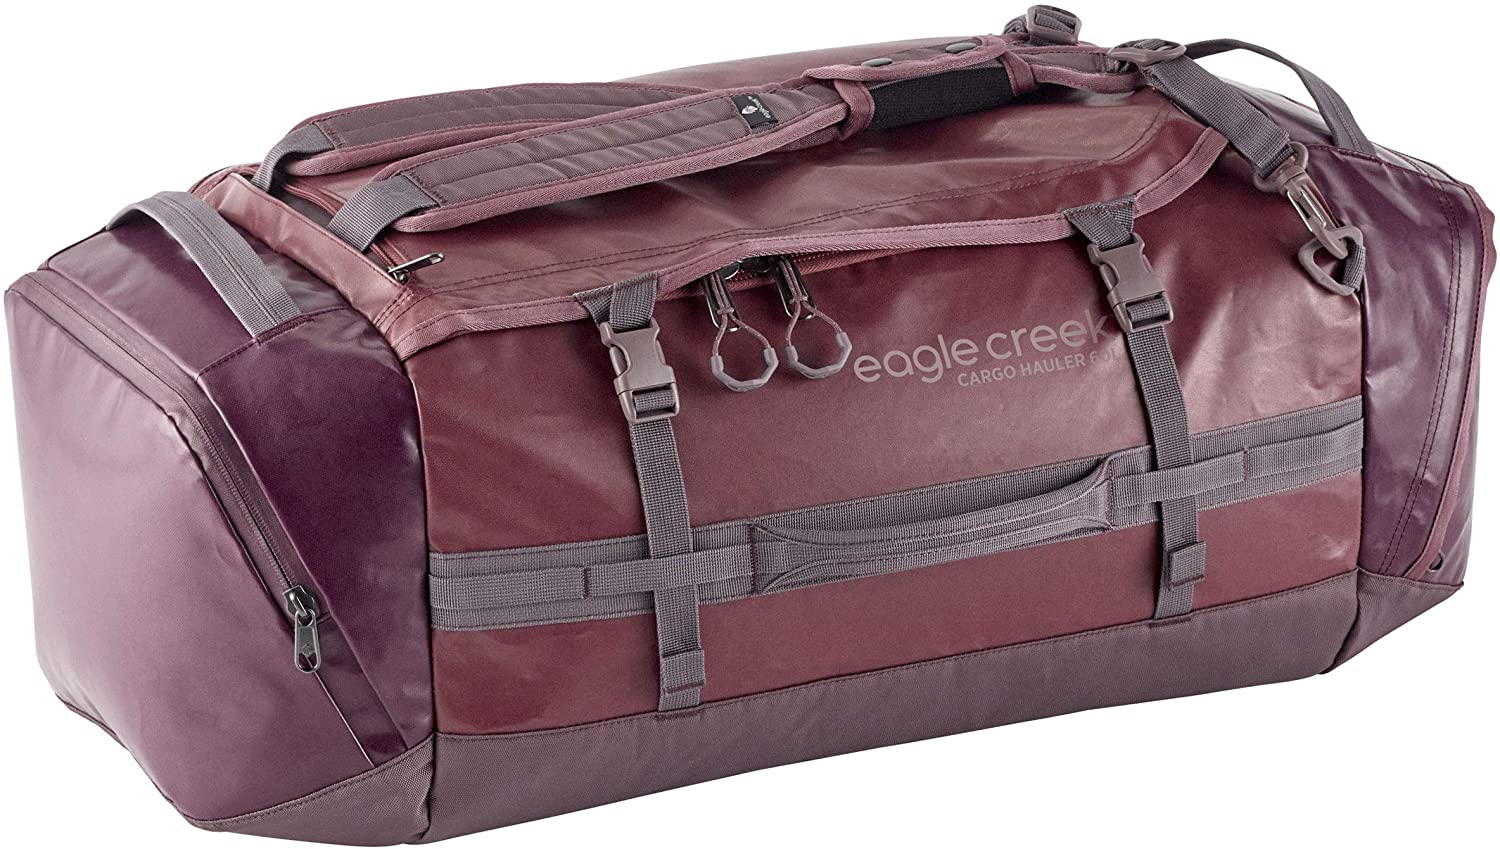 Eagle Creek Cargo Hauler Duffel 60L in Earth Red color from the front